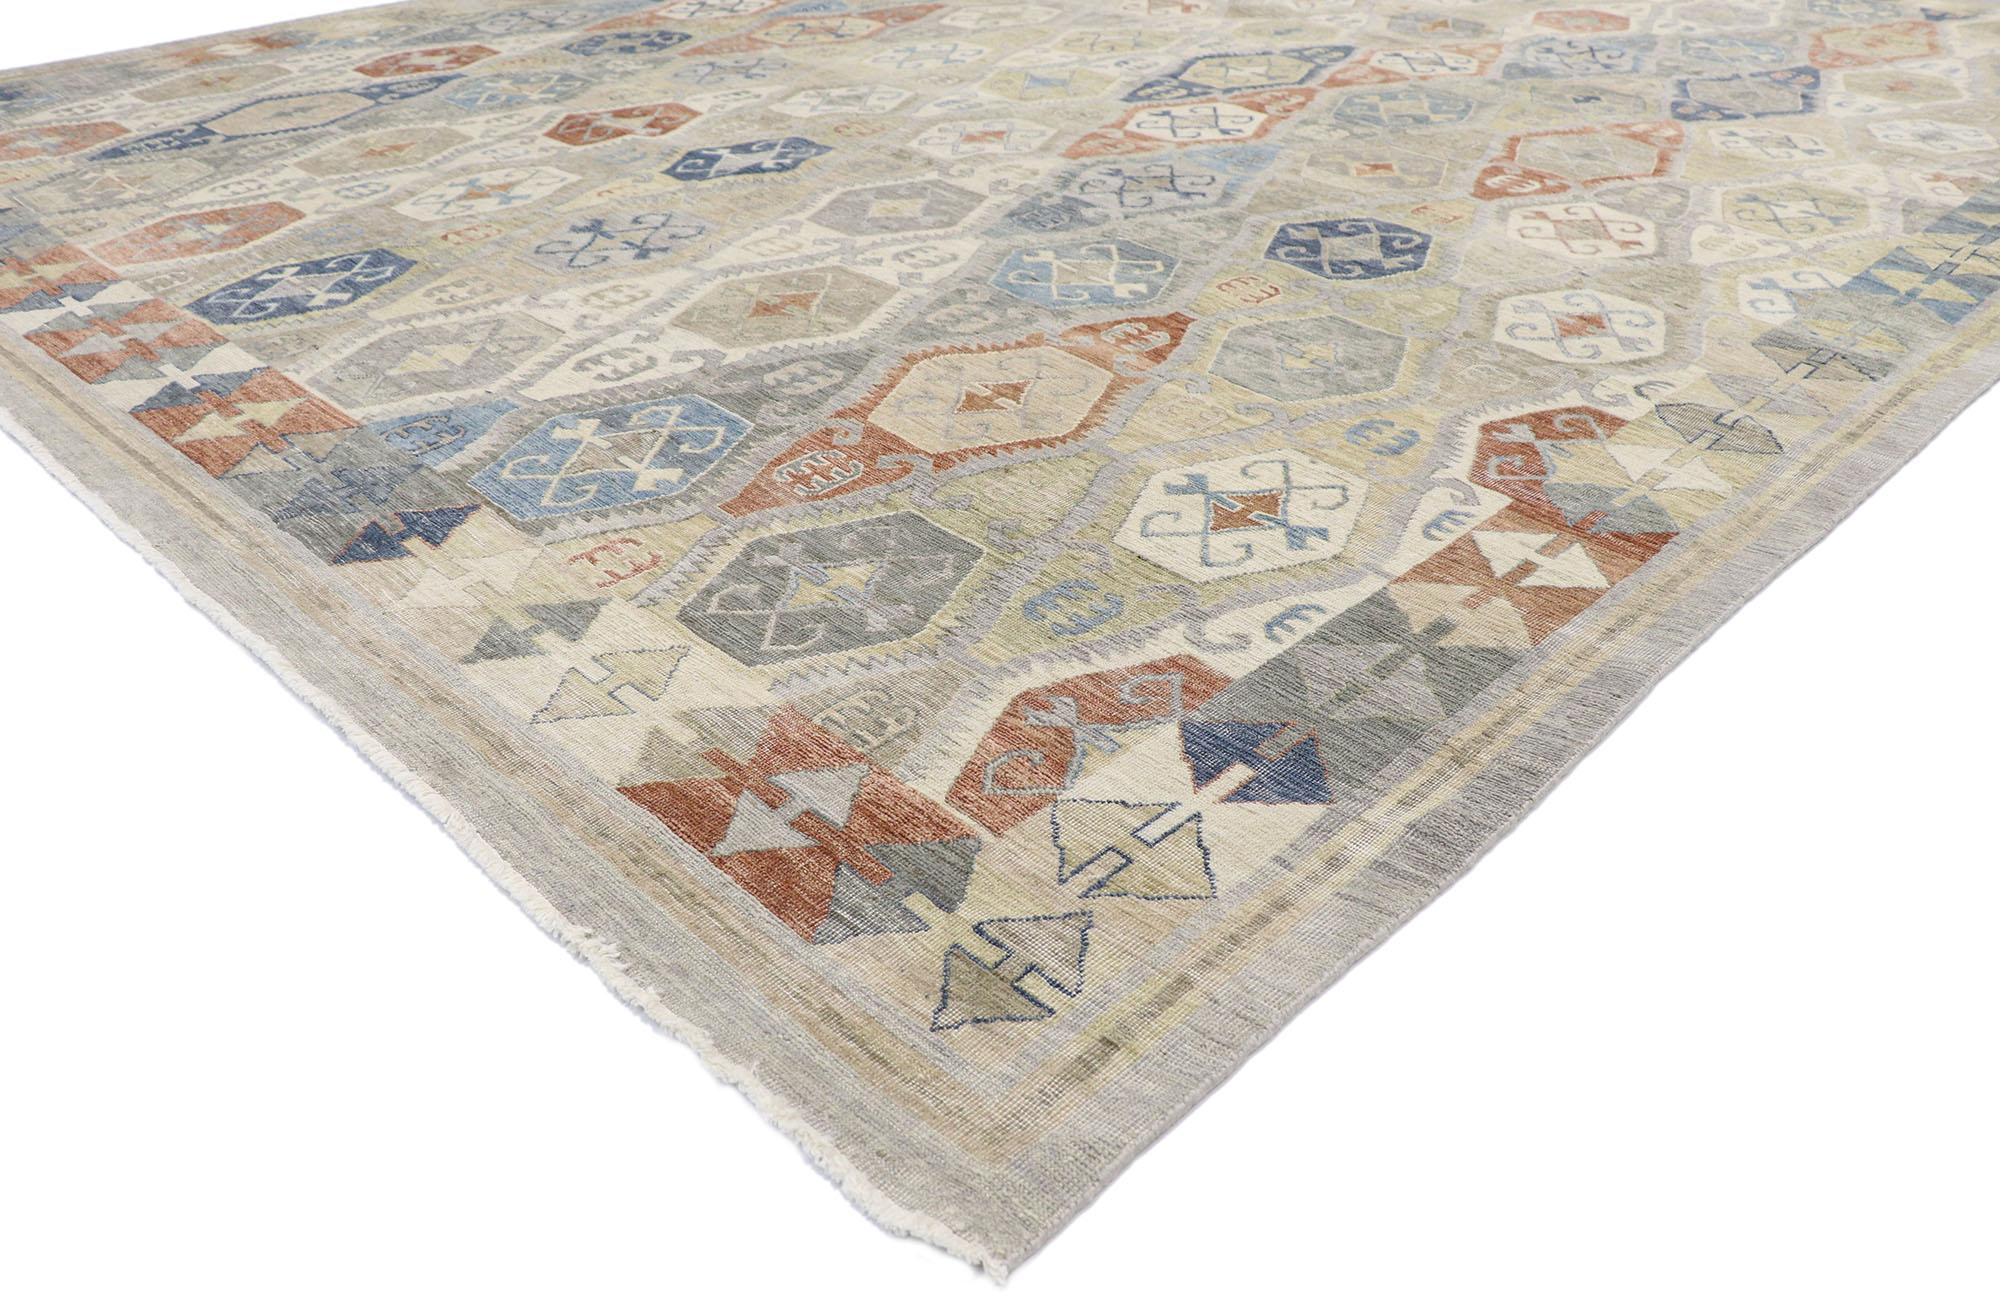 30627, new contemporary Oushak style rug with Modern Rustic Tribal style. With its modern rustic tribal style, incredible detail and texture, this hand-knotted wool contemporary Oushak style rug is a captivating vision of woven beauty. The abrashed